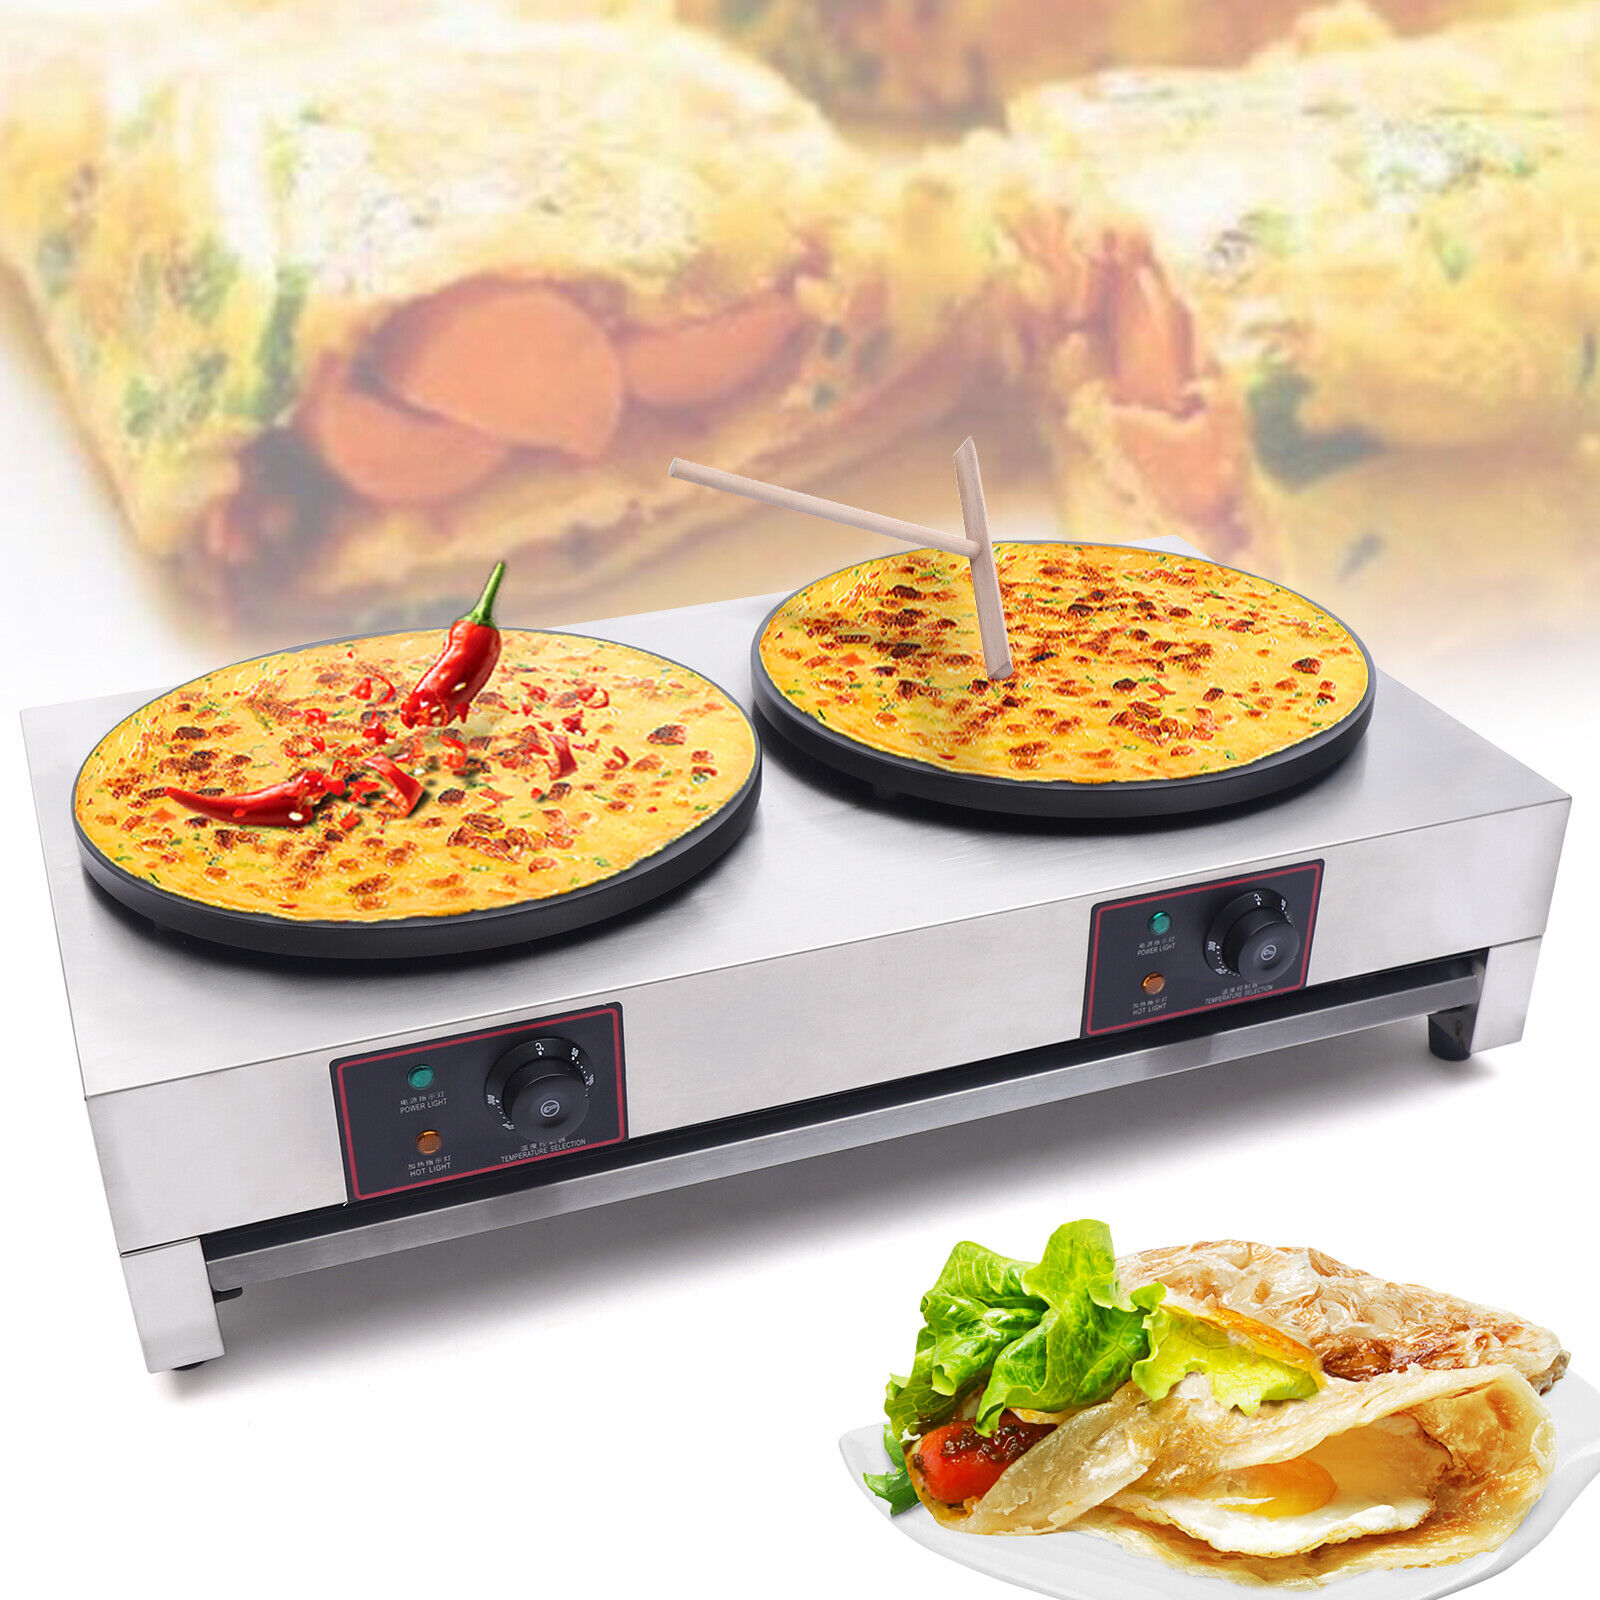 3kw+3kw 40cm 16" Commercial Double Pancake Maker Luxury Electric Crepe Unbranded Does Not Apply - фотография #14